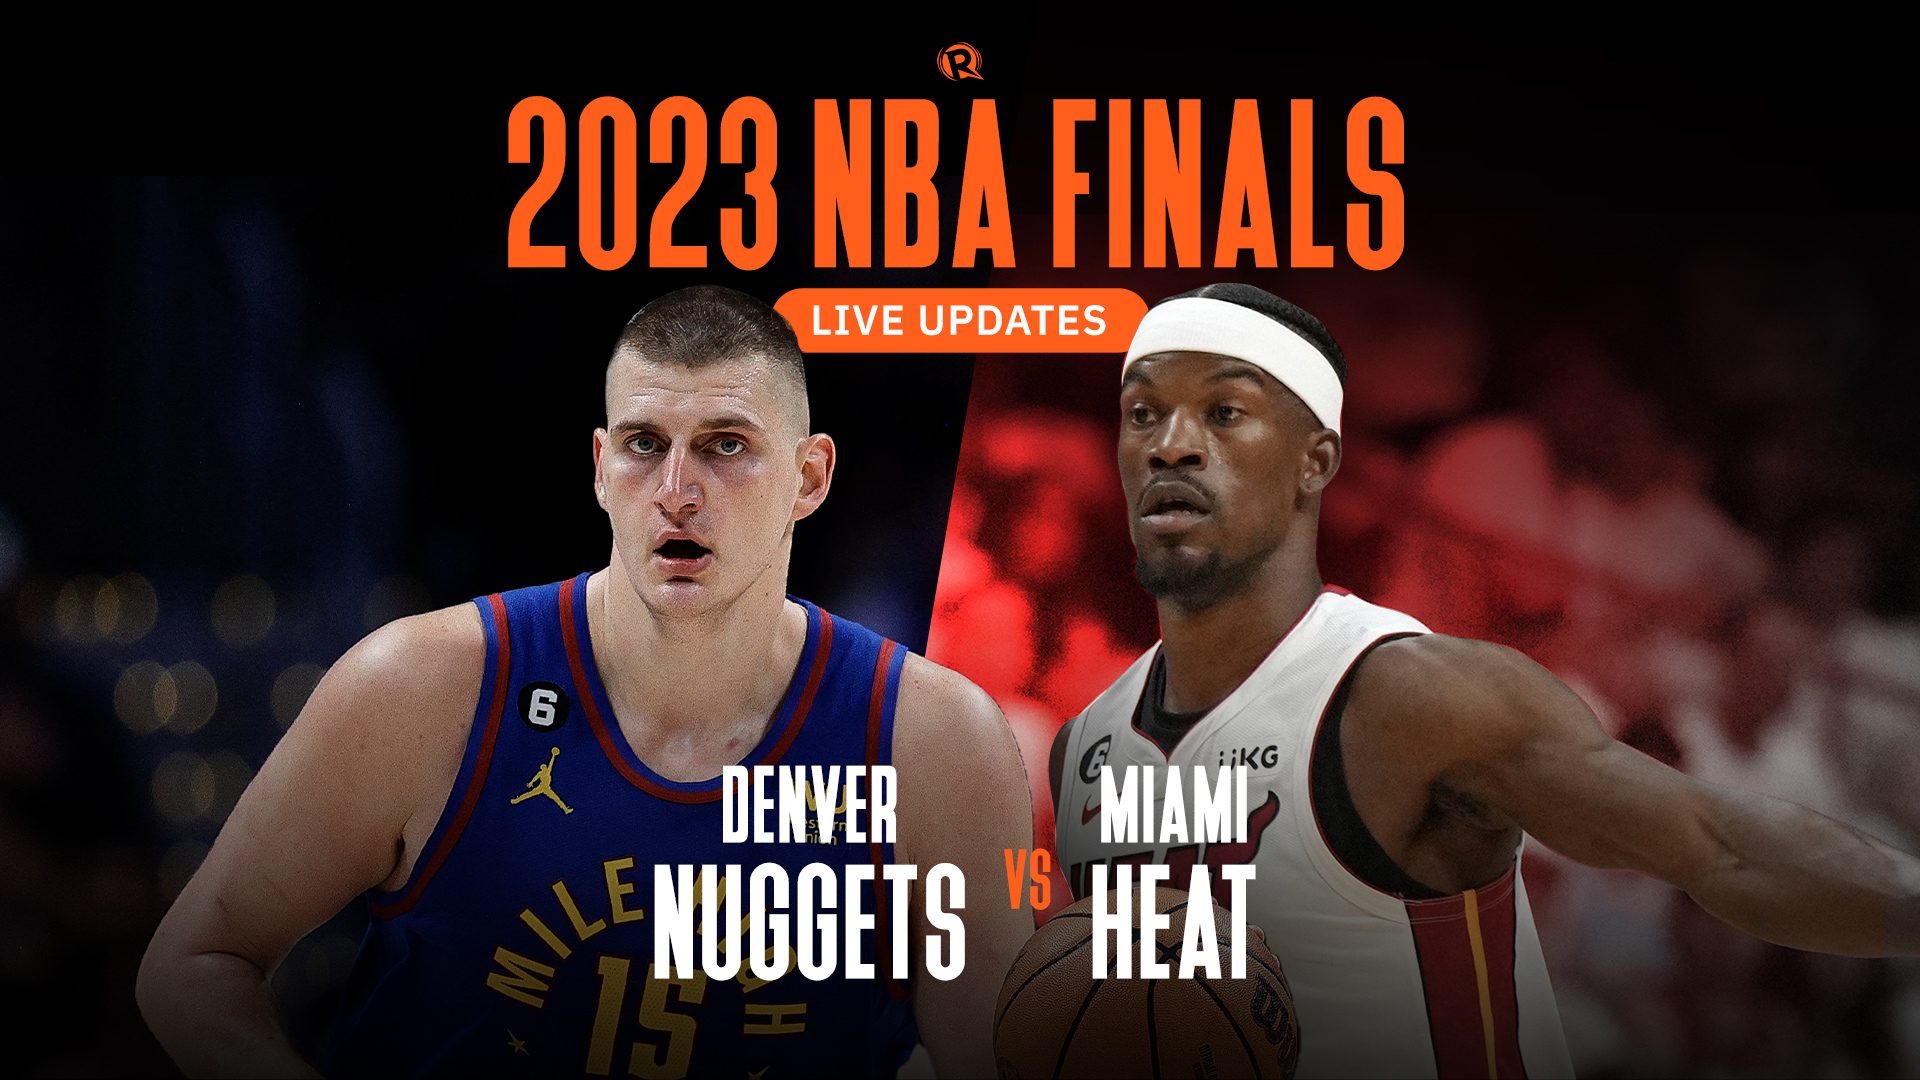 Nuggets and Heat ready to kick off 2023 NBA Finals